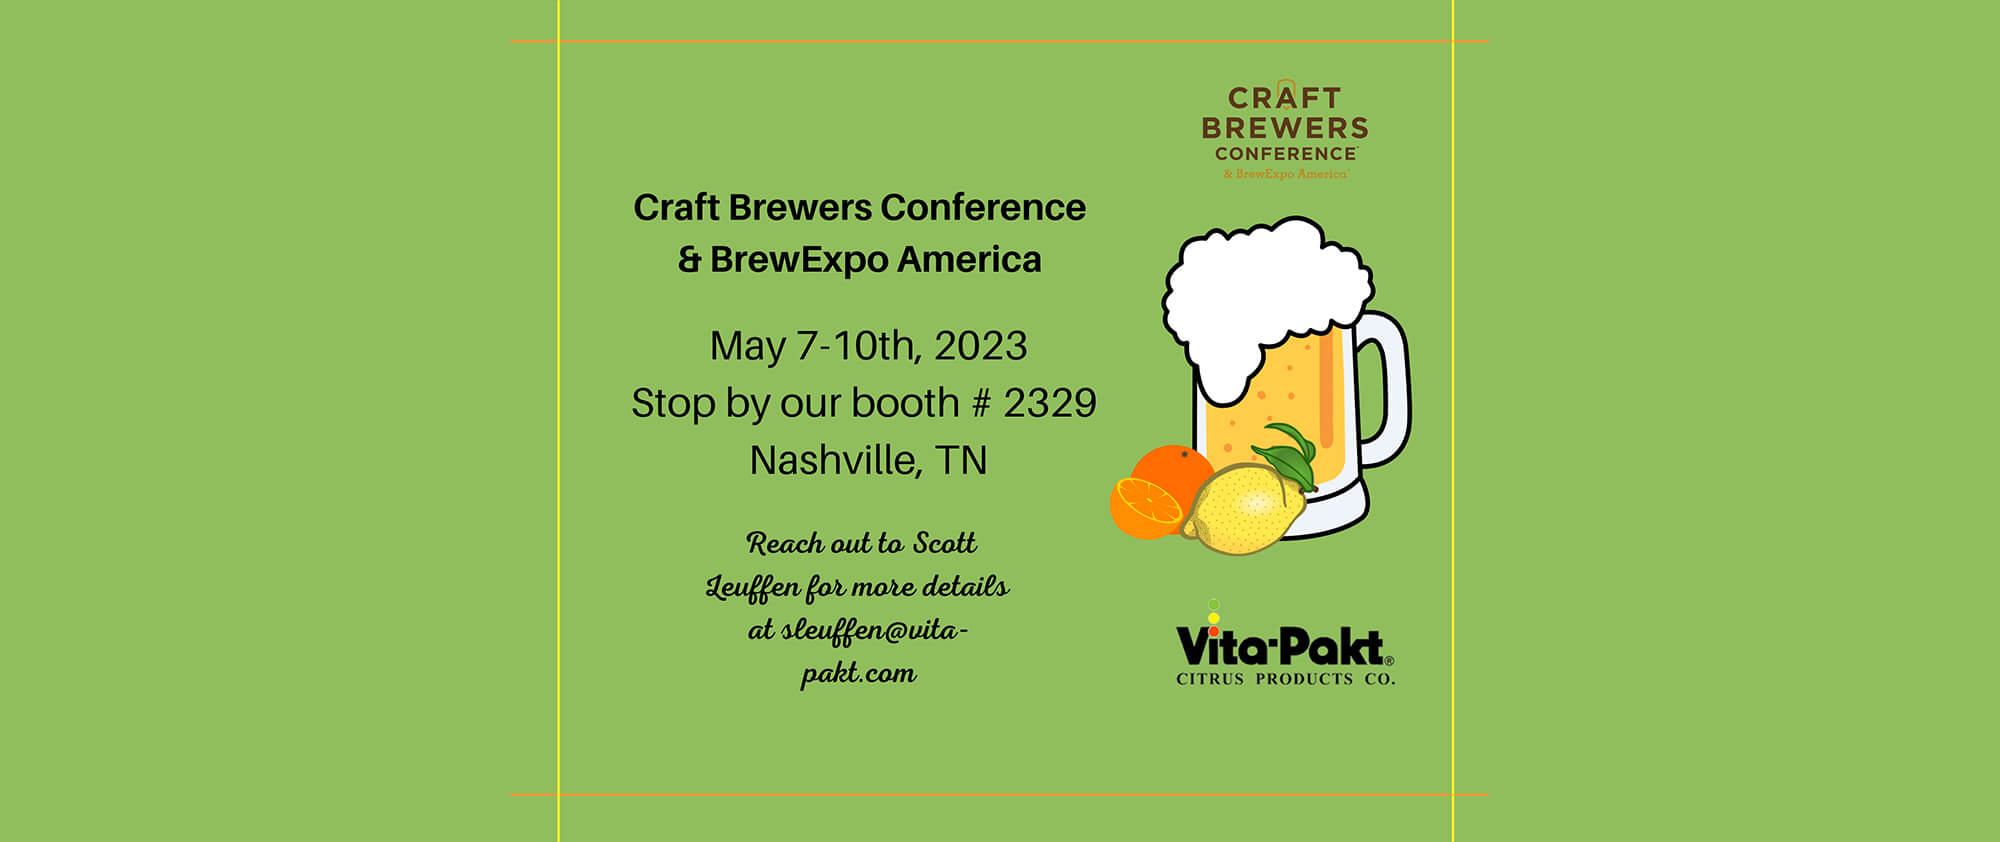 Craft Brewers Conference - May 7 - 10